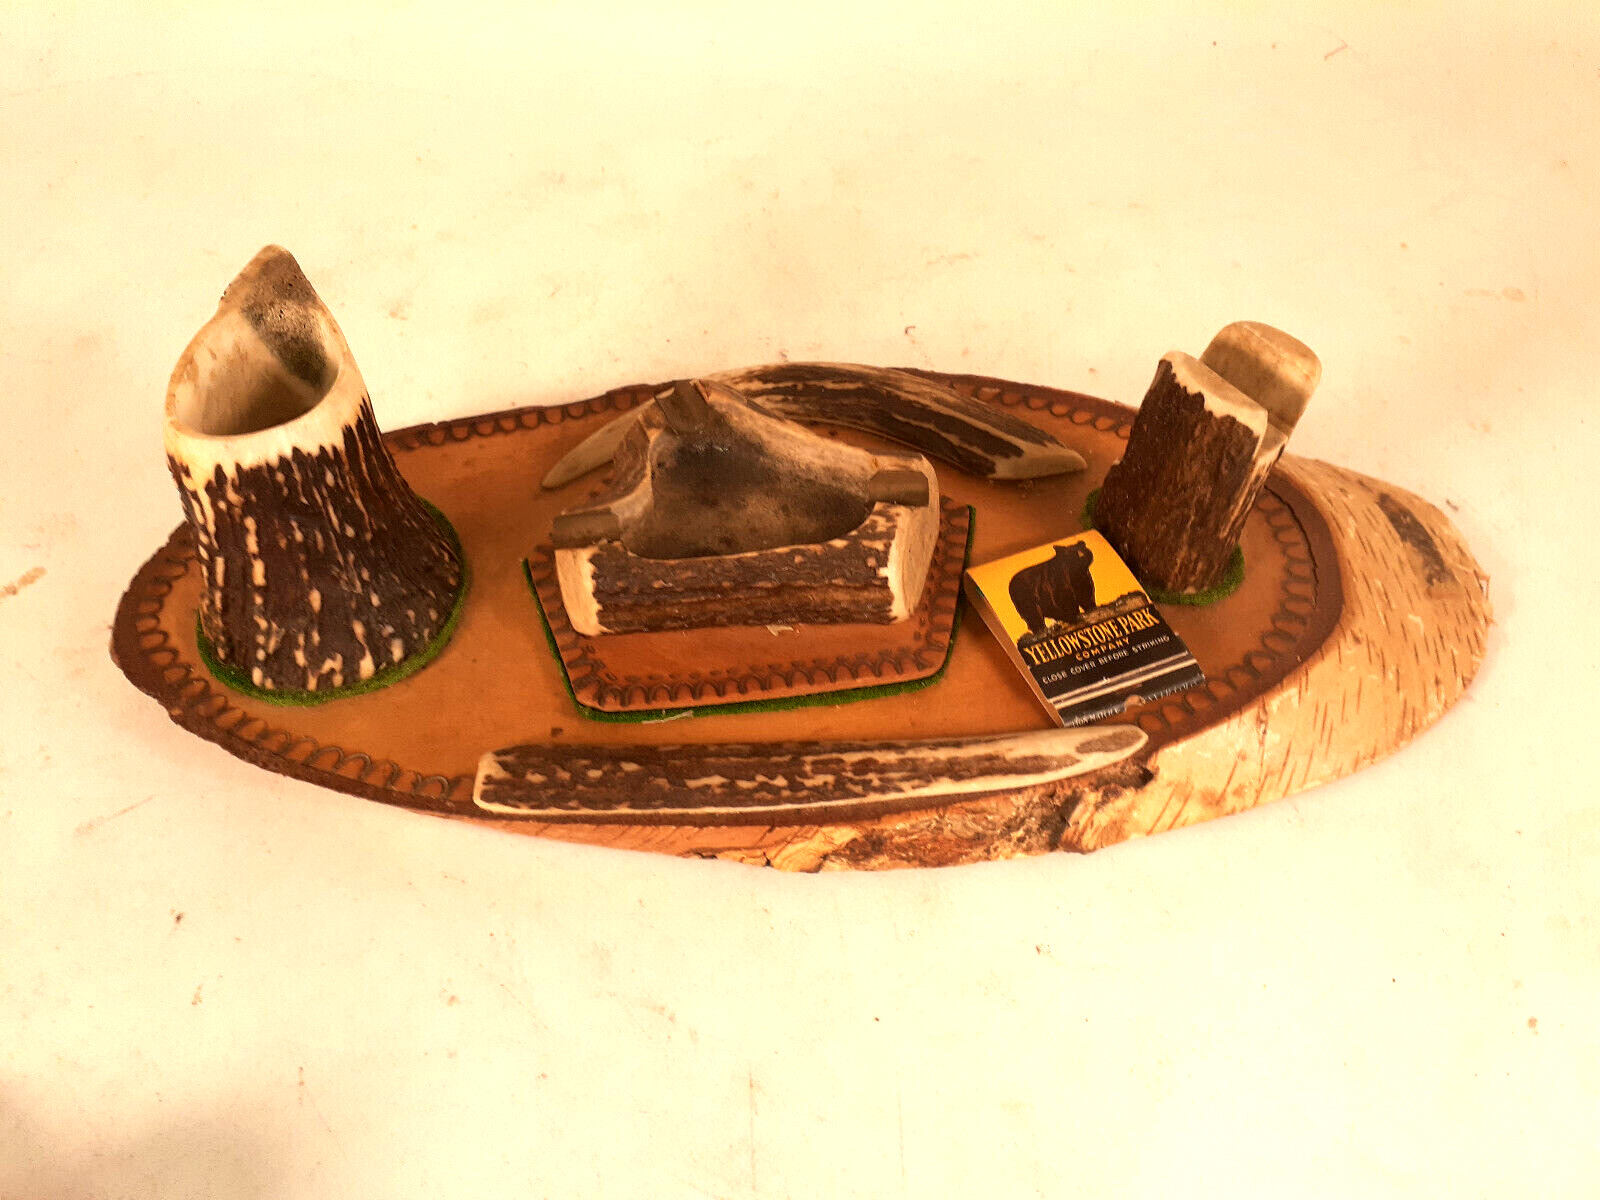 Cool Rustic Smoking Tray, Ashtray, Made From Antlers and Birch Log, 1930s